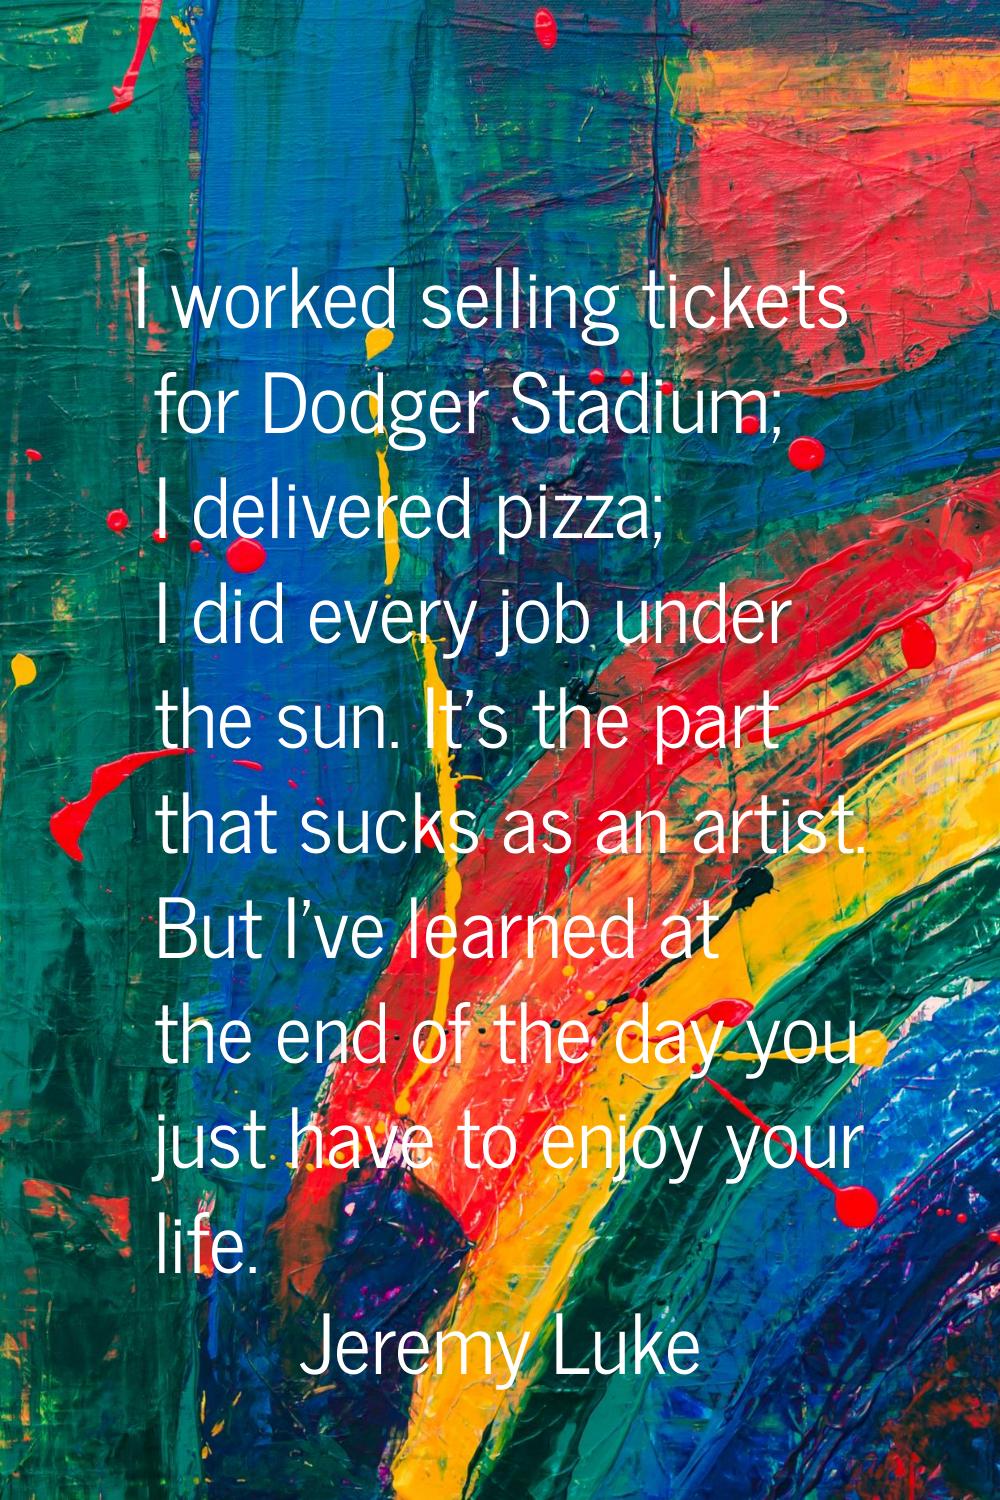 I worked selling tickets for Dodger Stadium; I delivered pizza; I did every job under the sun. It's